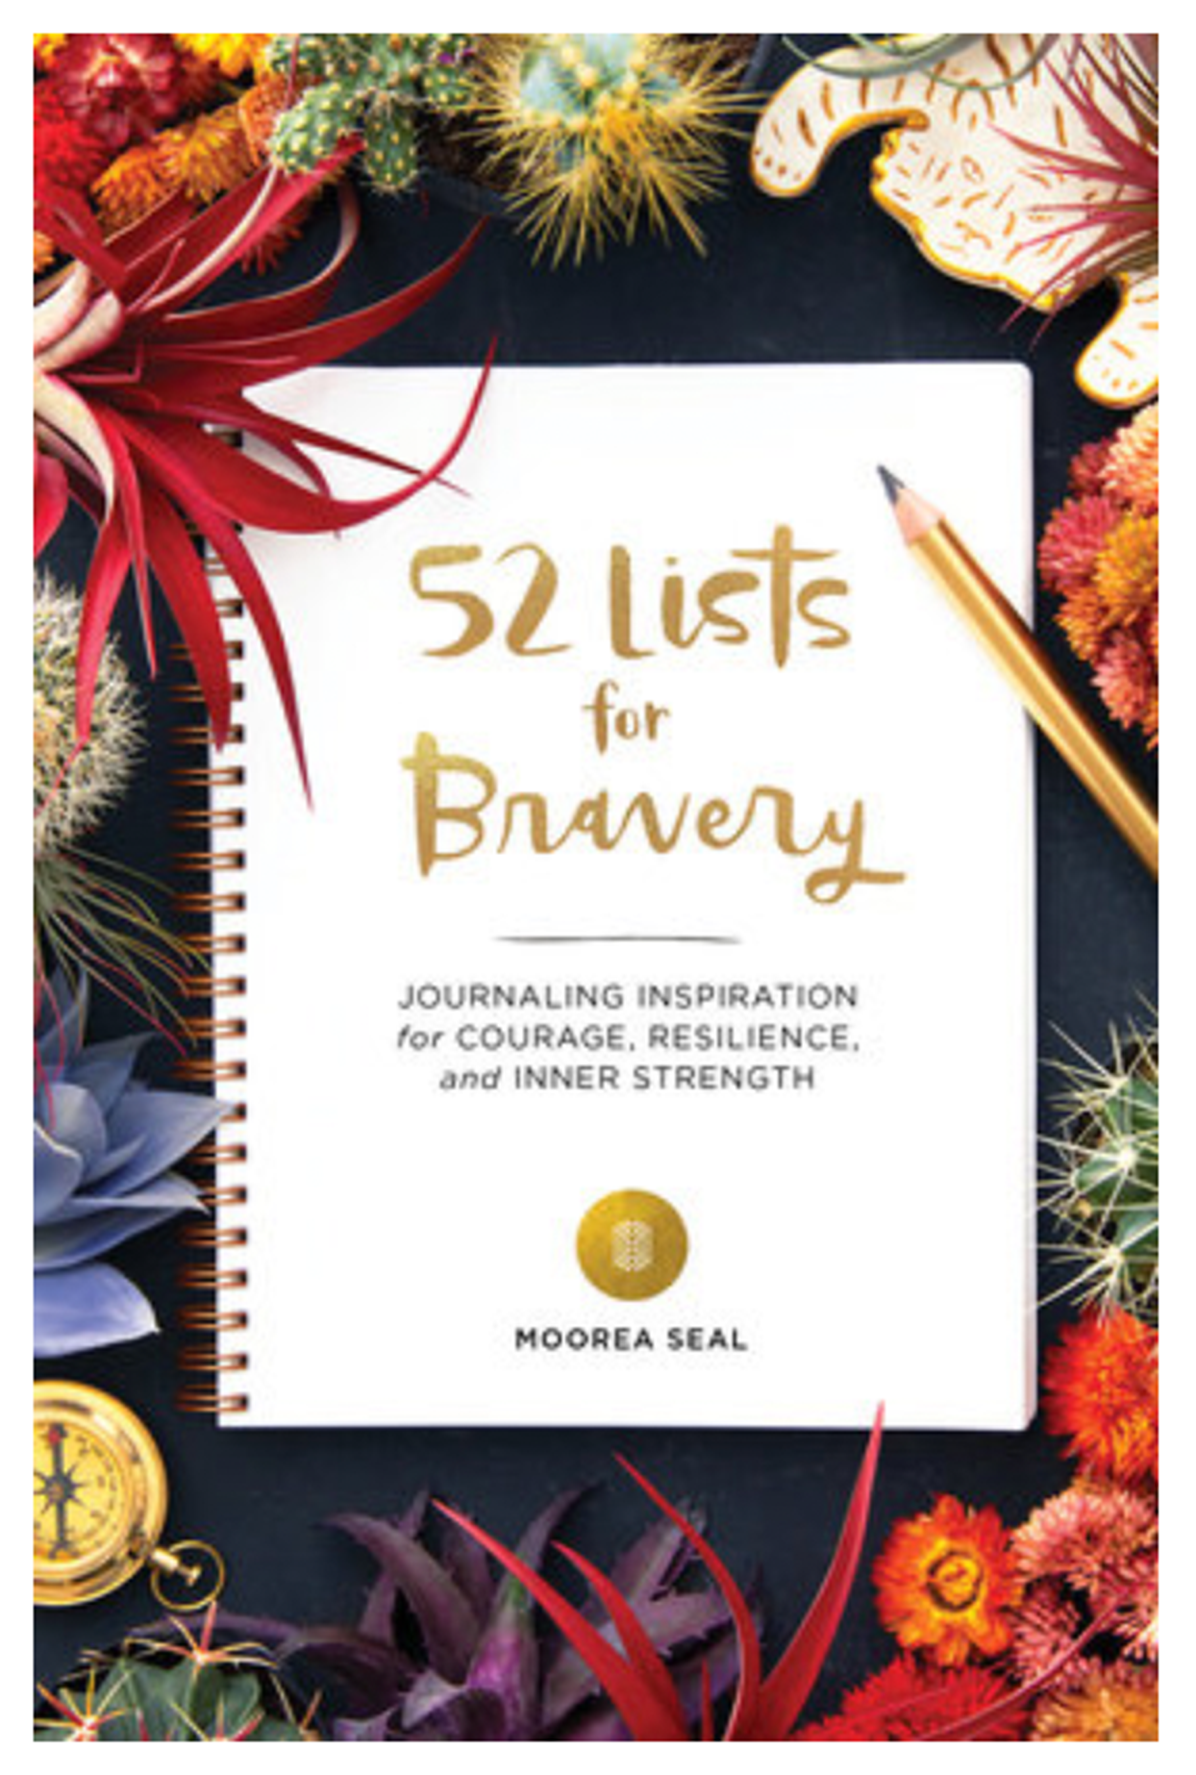 52 Lists for Bravery